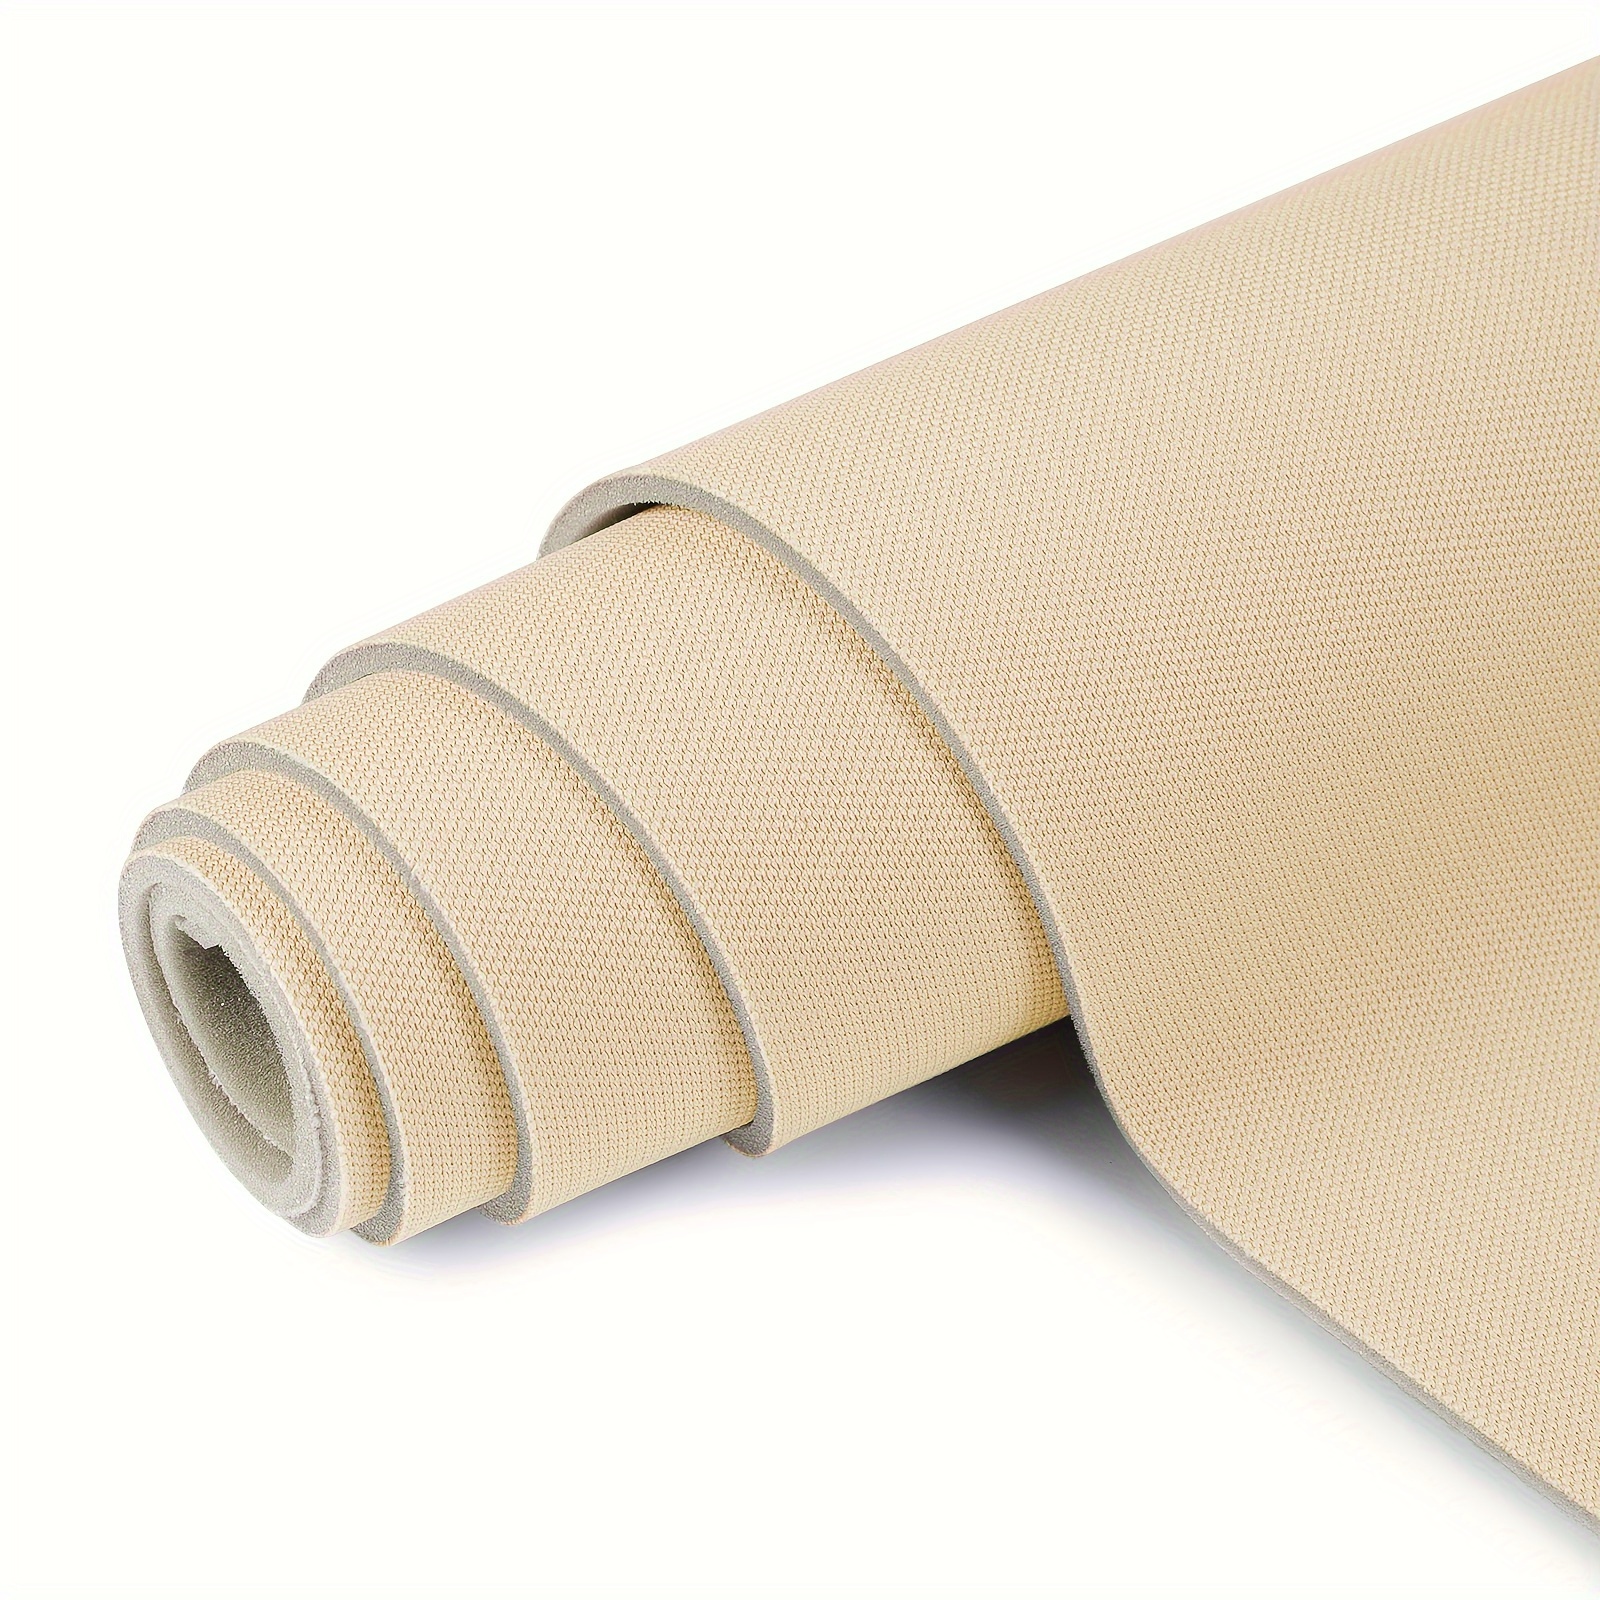 

4 Yards Headliner Fabric 1/8" Car Roof Liner Upholstery, Material For Automotive Ceiling Replacement Renovate Repair Khaki